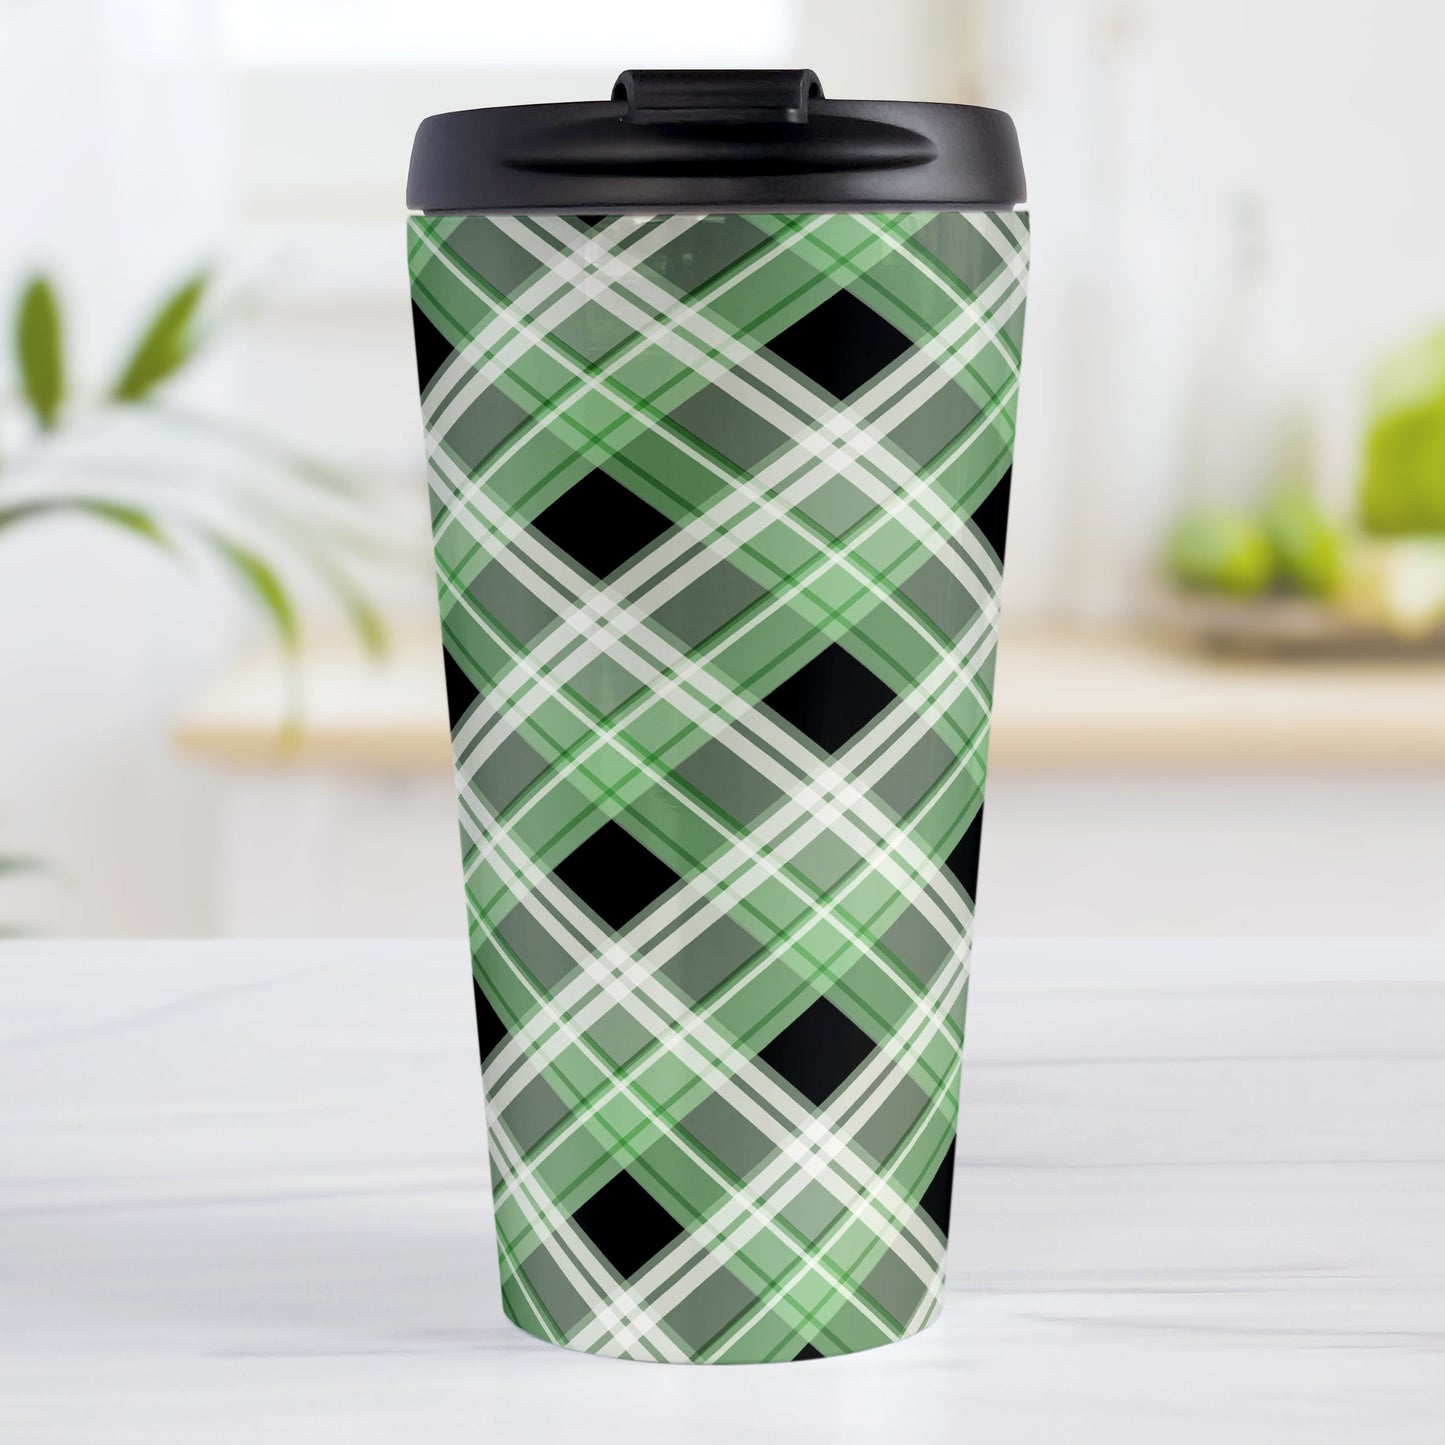 Alternative Green Plaid Travel Mug (15oz) at Amy's Coffee Mugs. A stainless steel travel mug designed with a diagonal green, black, and white plaid pattern that wraps around the mug. Designed for someone who likes plaid patterns and loves the color green.